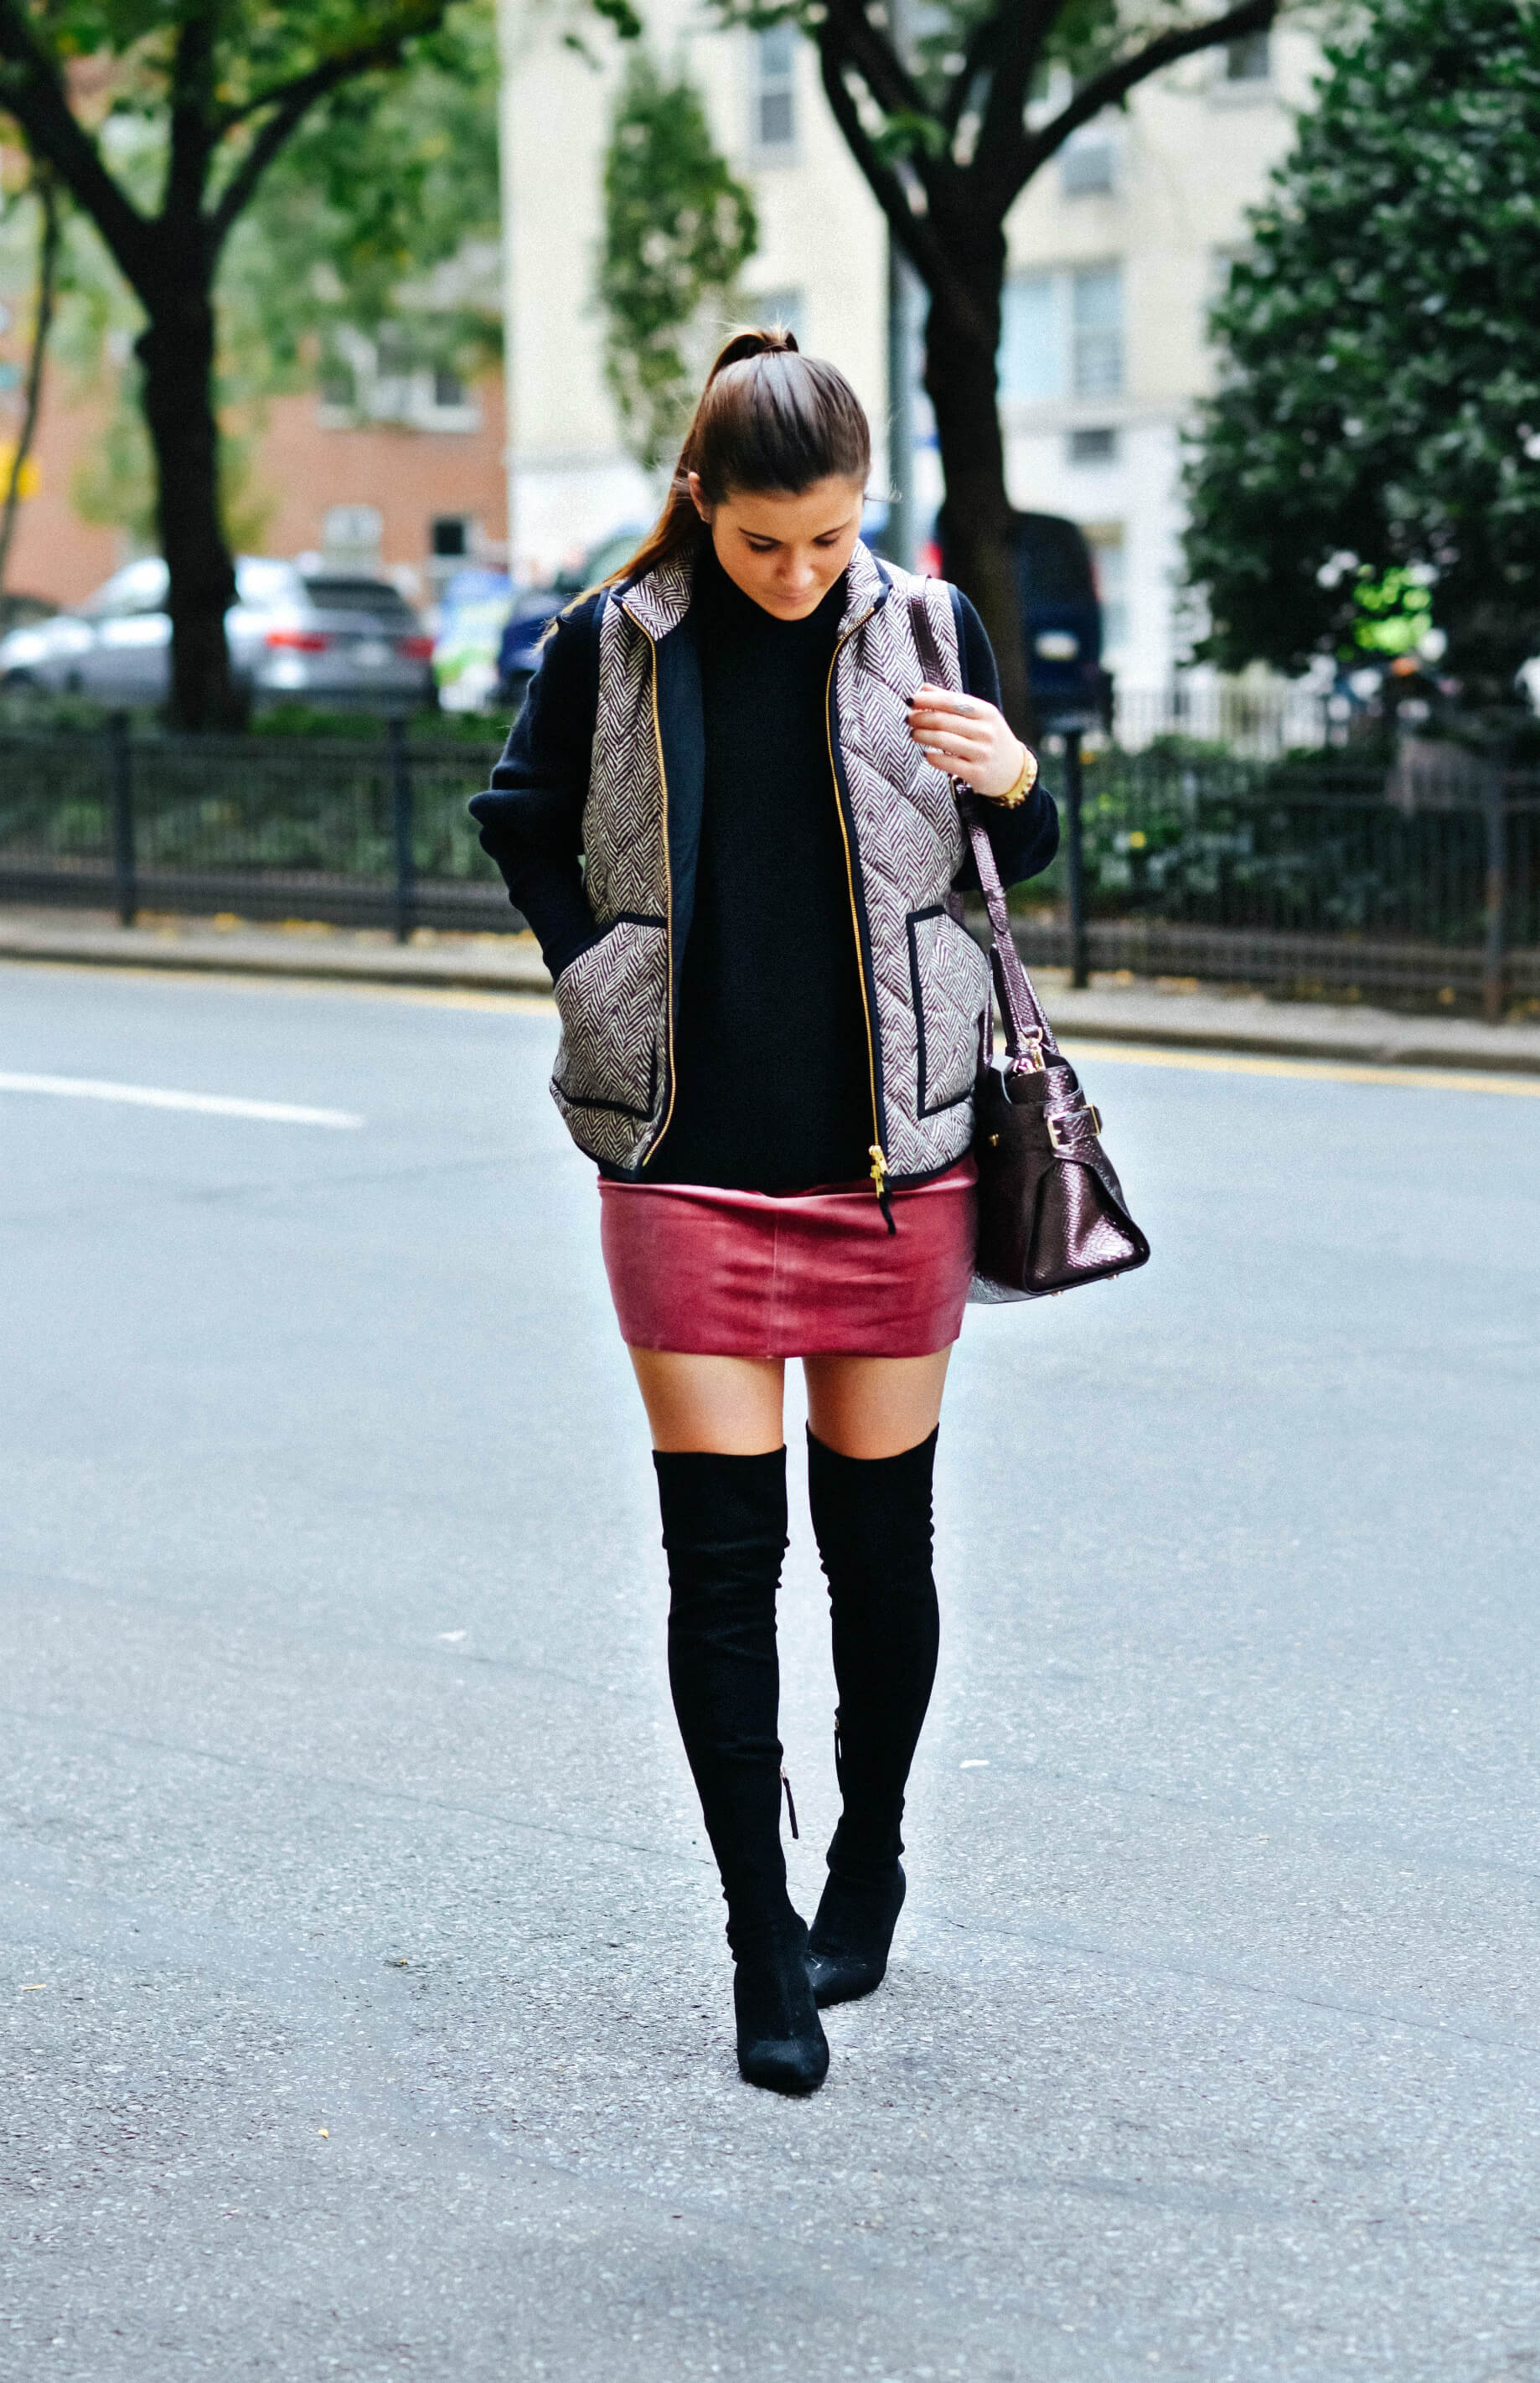 Fall Outfit Inspiration, Herringbone Vest, Suede Skirt, Over The Knee Boots, Tilden of To Be Bright